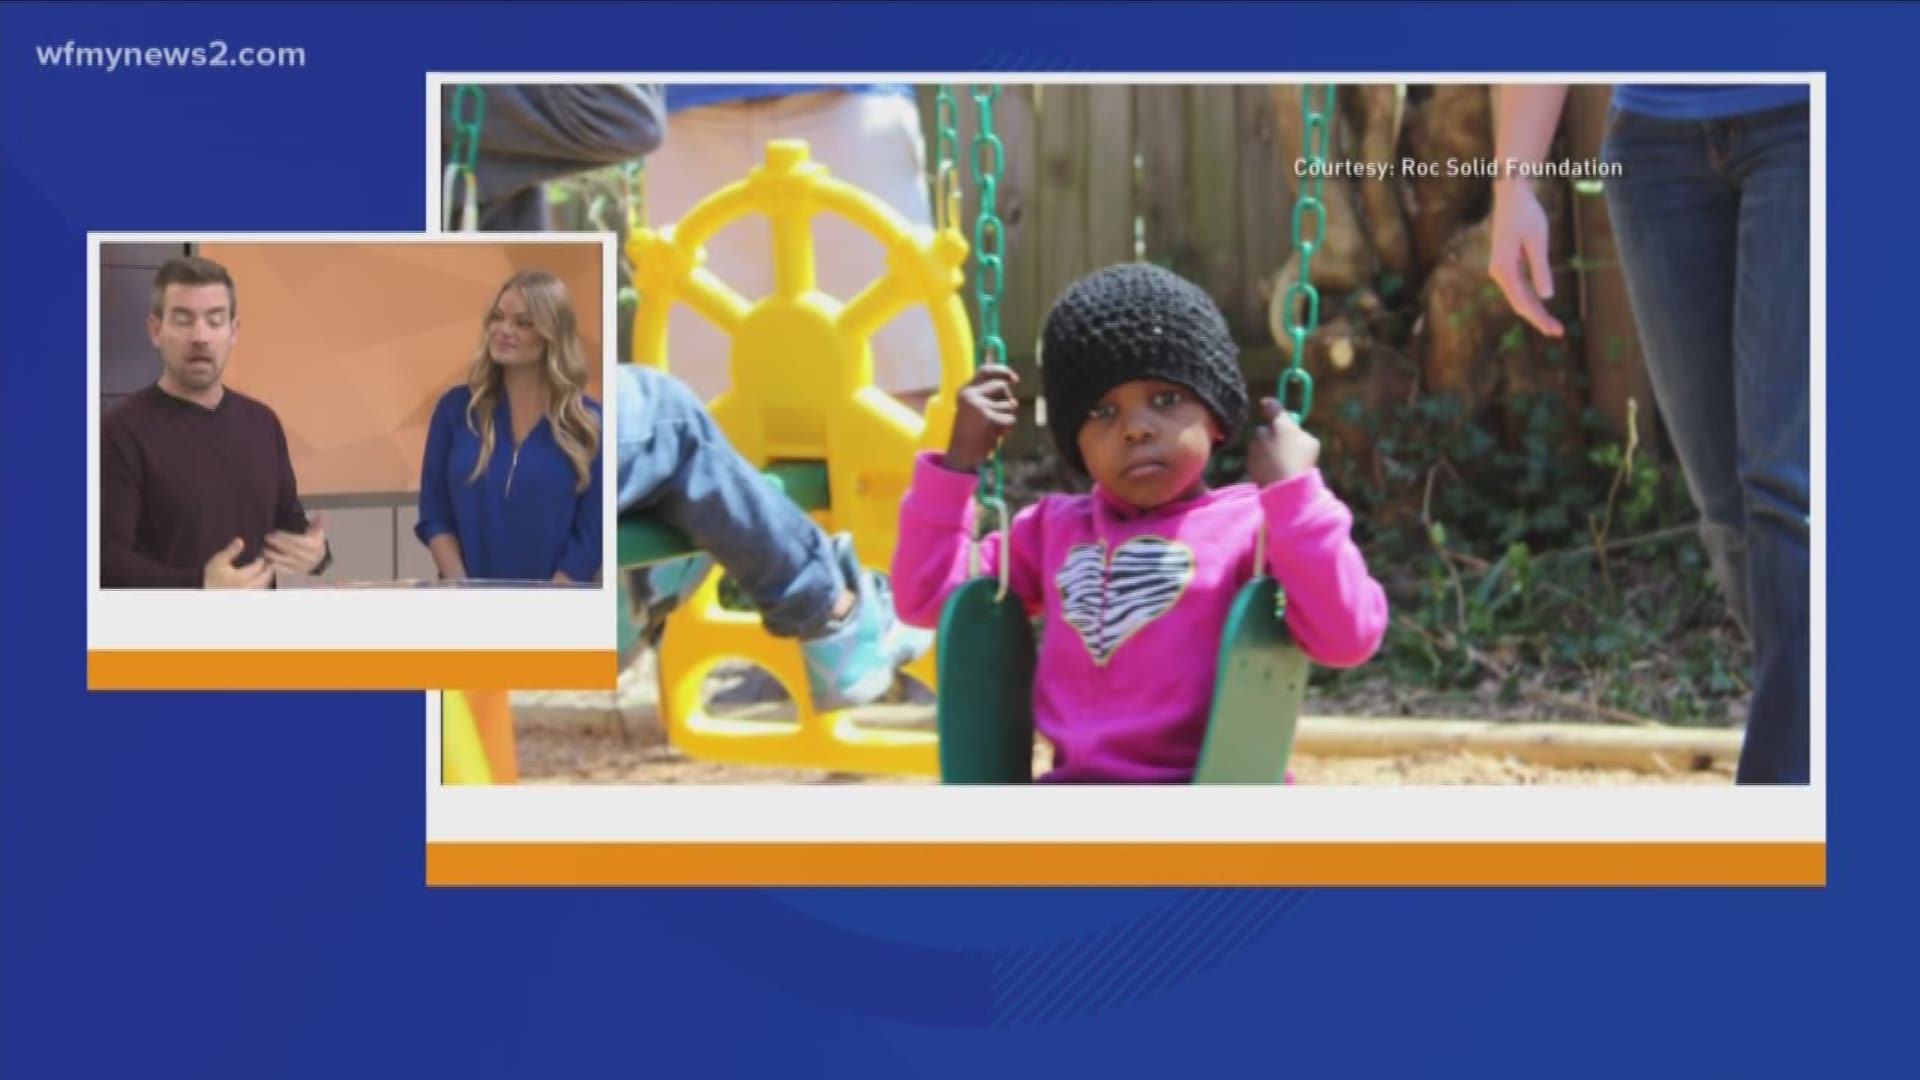 This Saturday, December 1, 2018, dozens of volunteers with the Roc Solid Foundation will build a brand new play set in just four hours for a 2-year-old from High Point